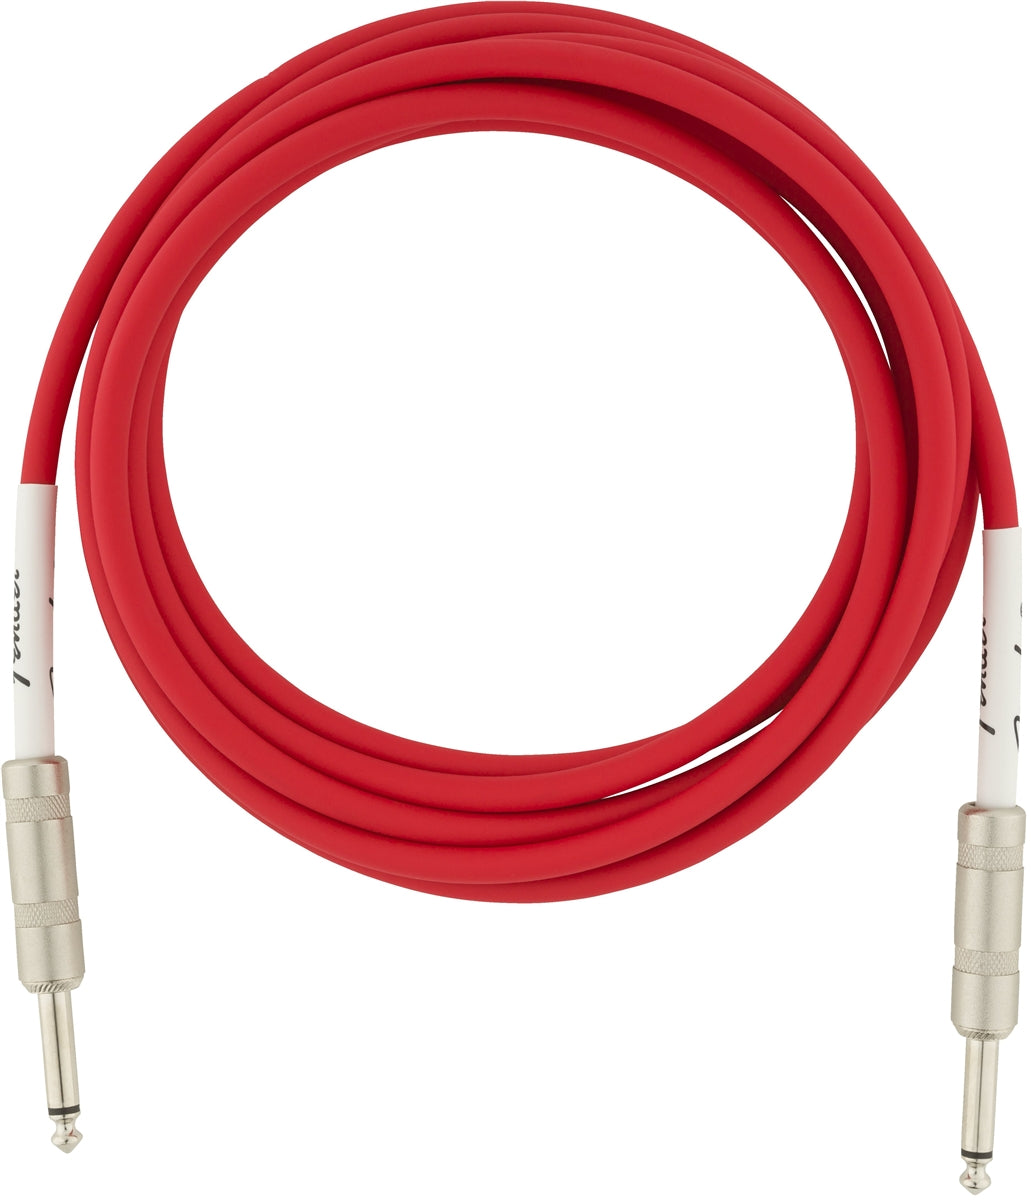 Fender Original Series Straight to Straight Instrument Cable 10ft - Fiesta Red